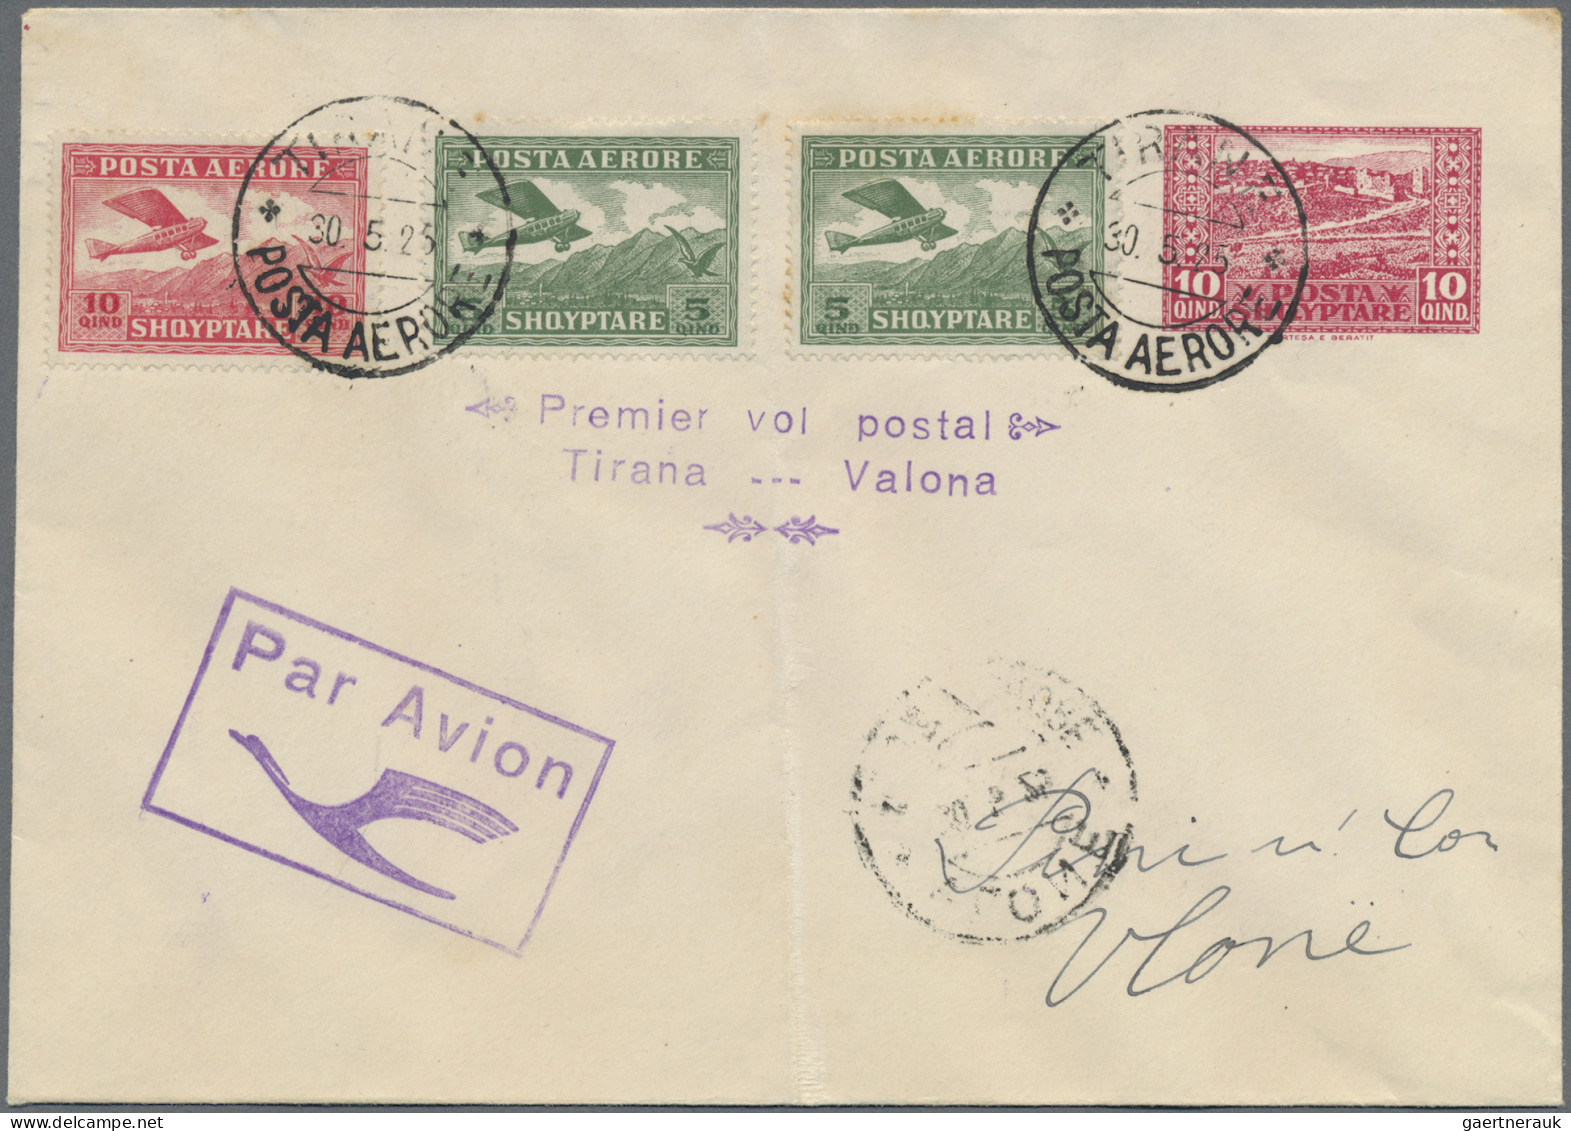 Airmail - Europe: 1925/1985, assortment of apprx. 156 airmail covers/cards, all